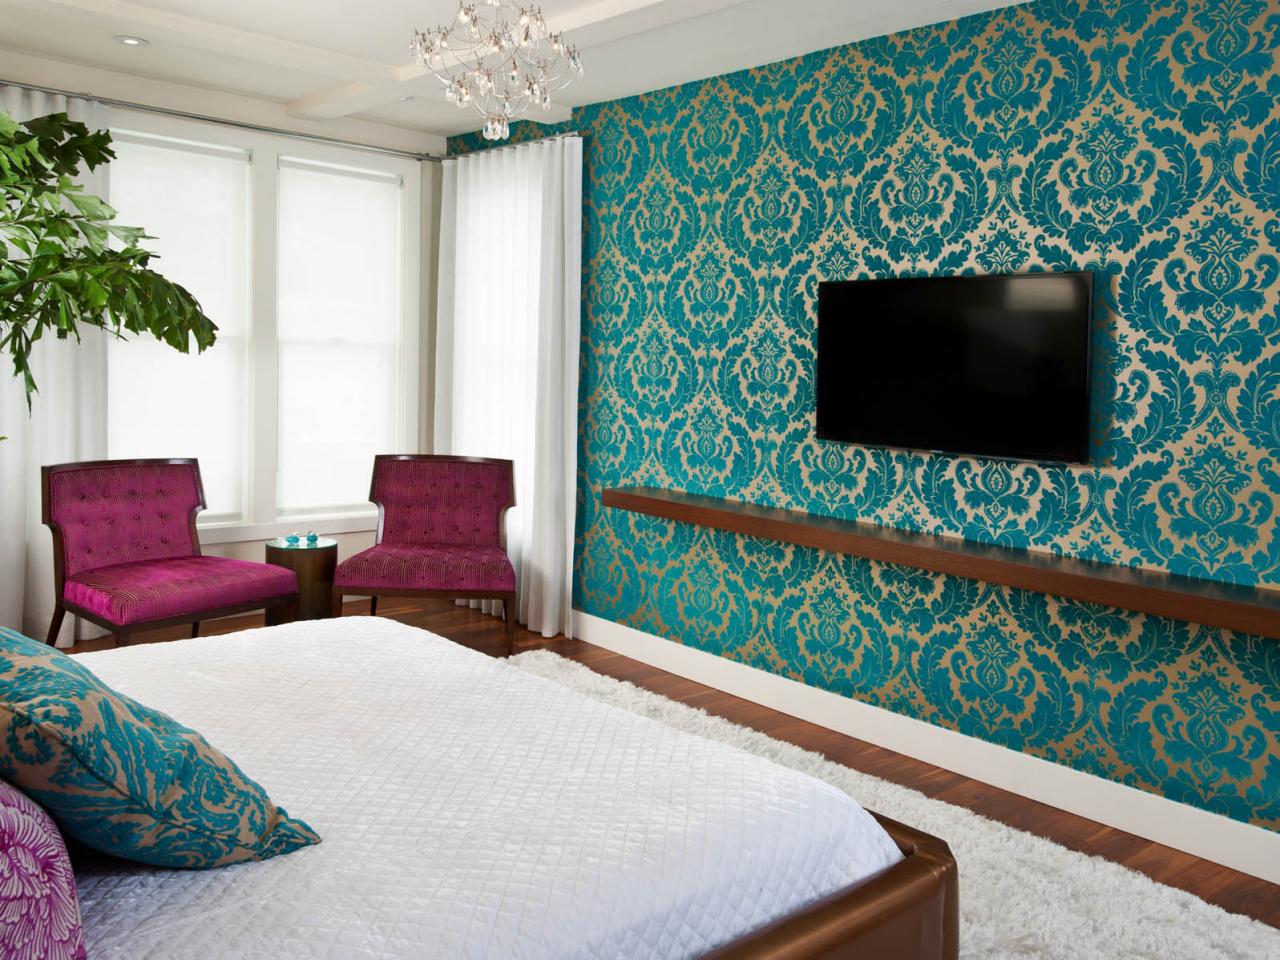 49 Rooms With Wallpaper Accent Walls On Wallpapersafari